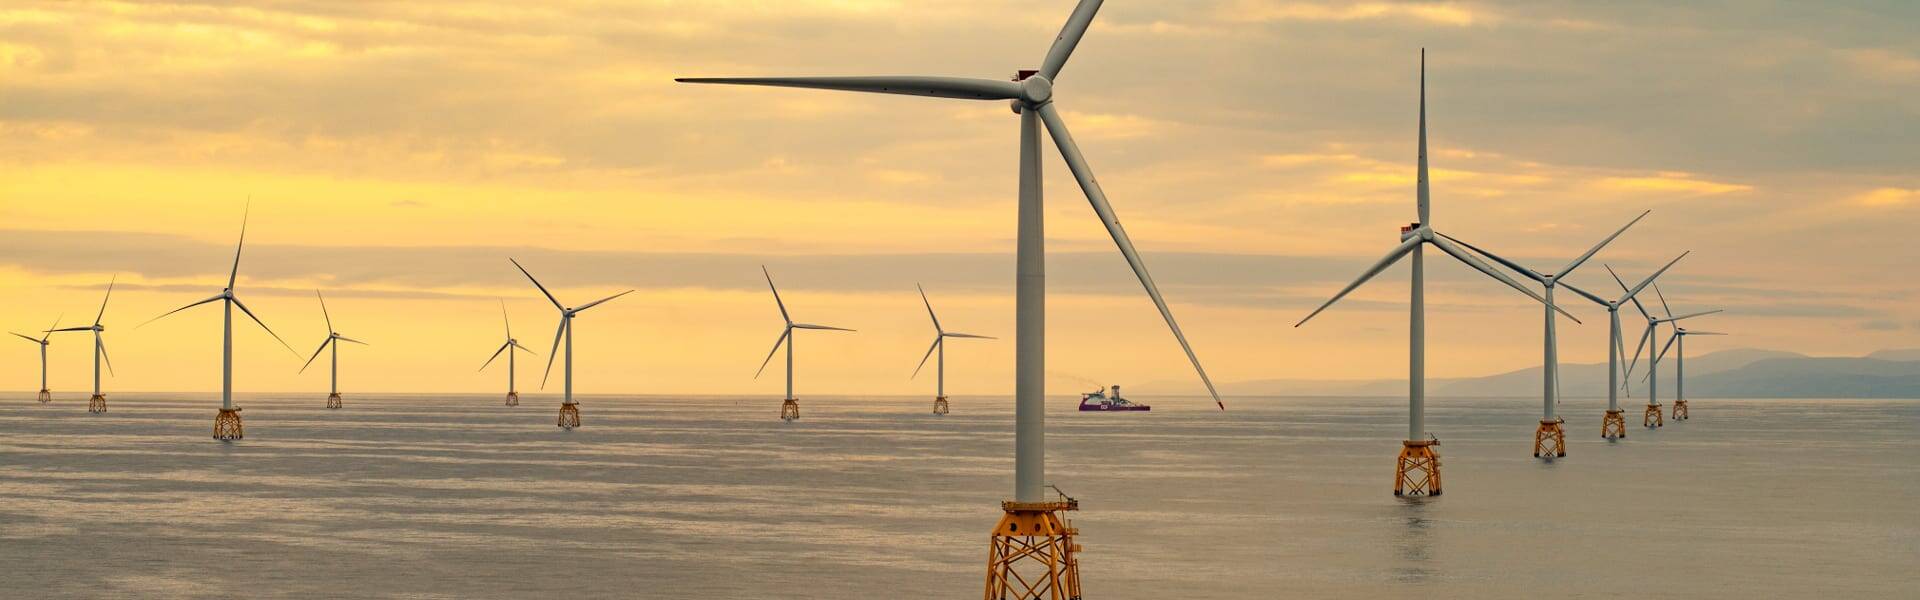 Eni buys 20% stake in Dogger Bank C offshore wind project